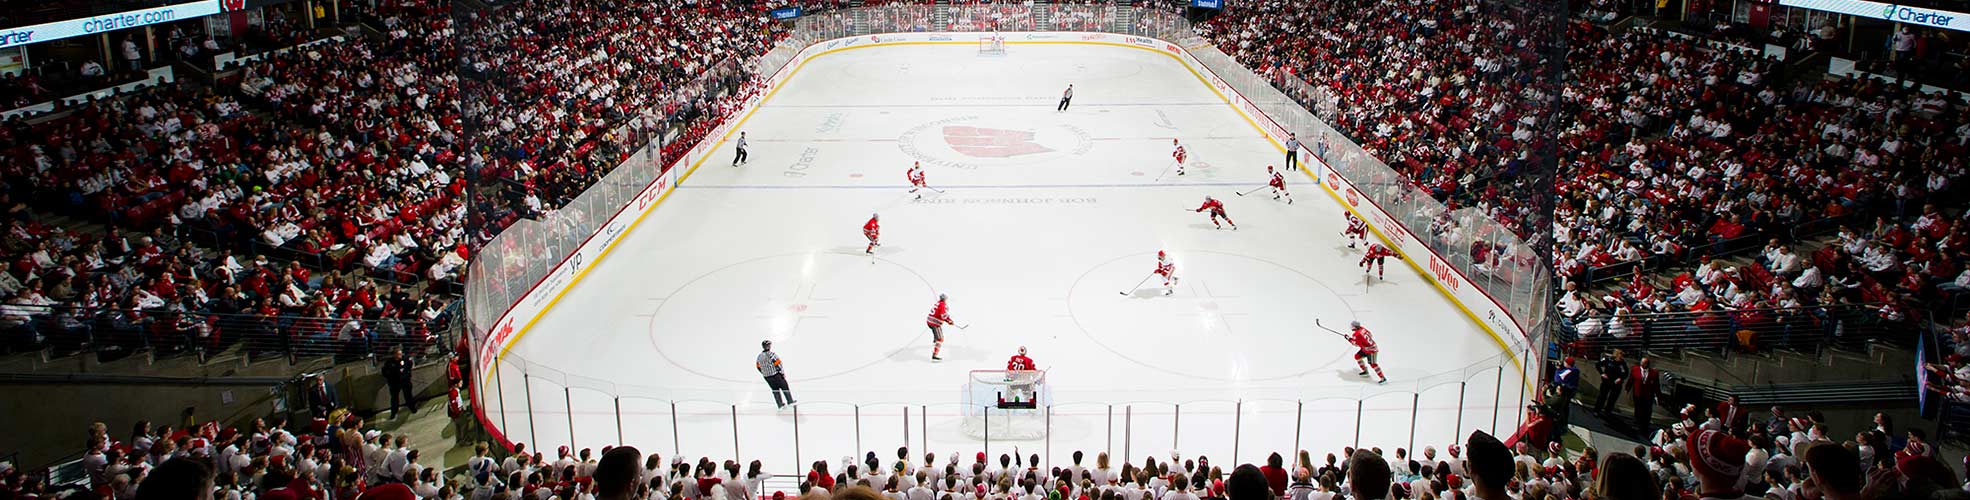 Photo of a UW-Madison Hockey Game at the Kohl Center.